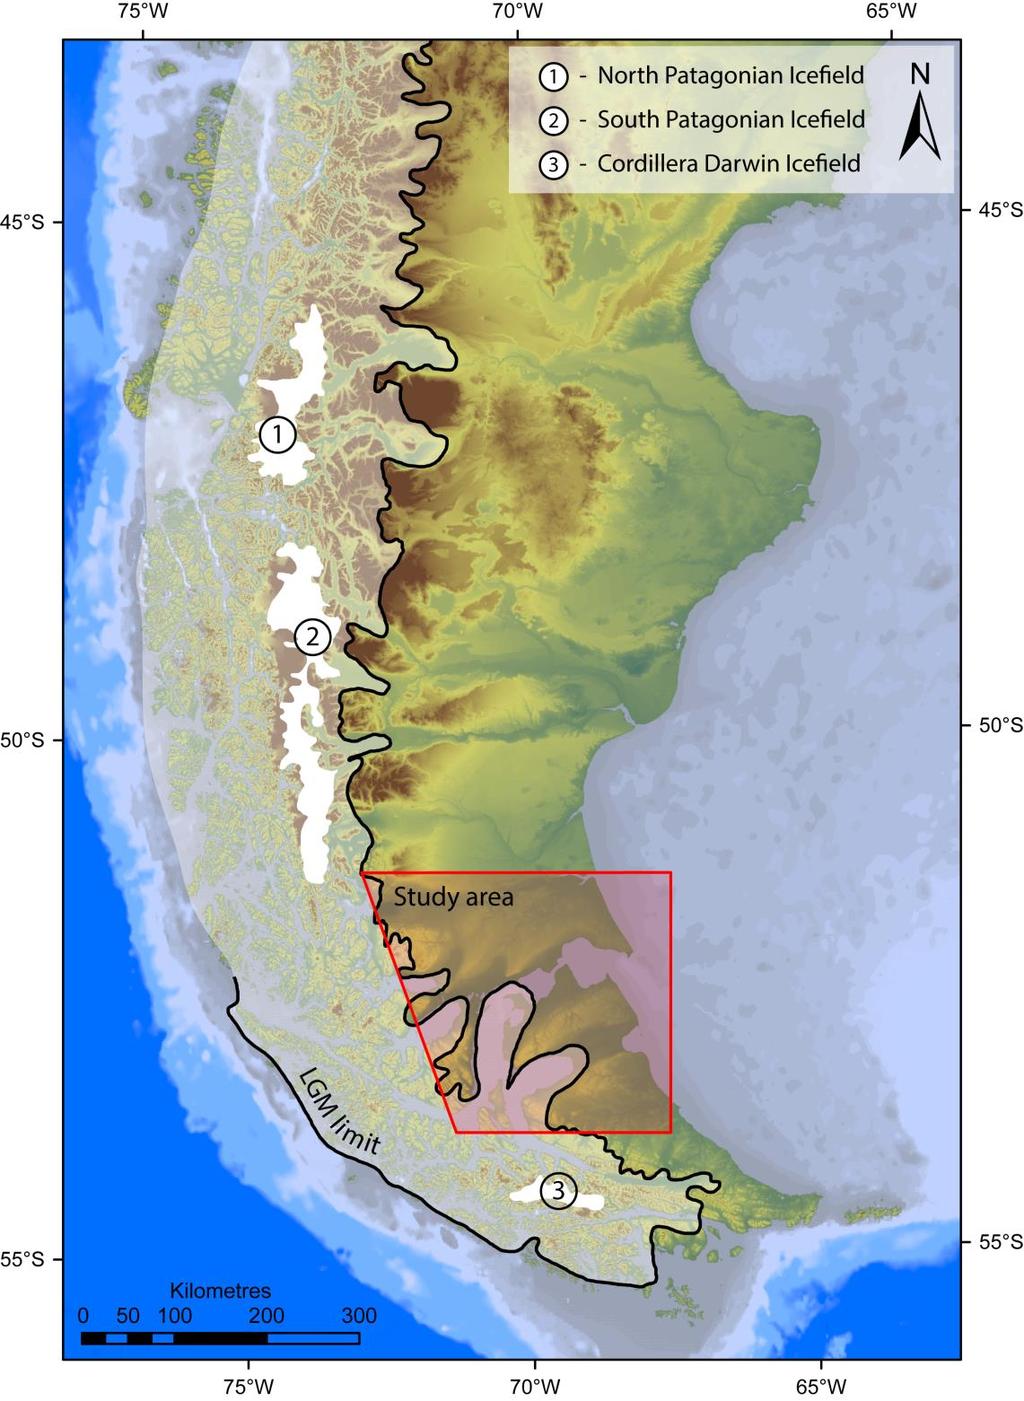 Figure 2.1. Location of the study area in southernmost Patagonia, South America.